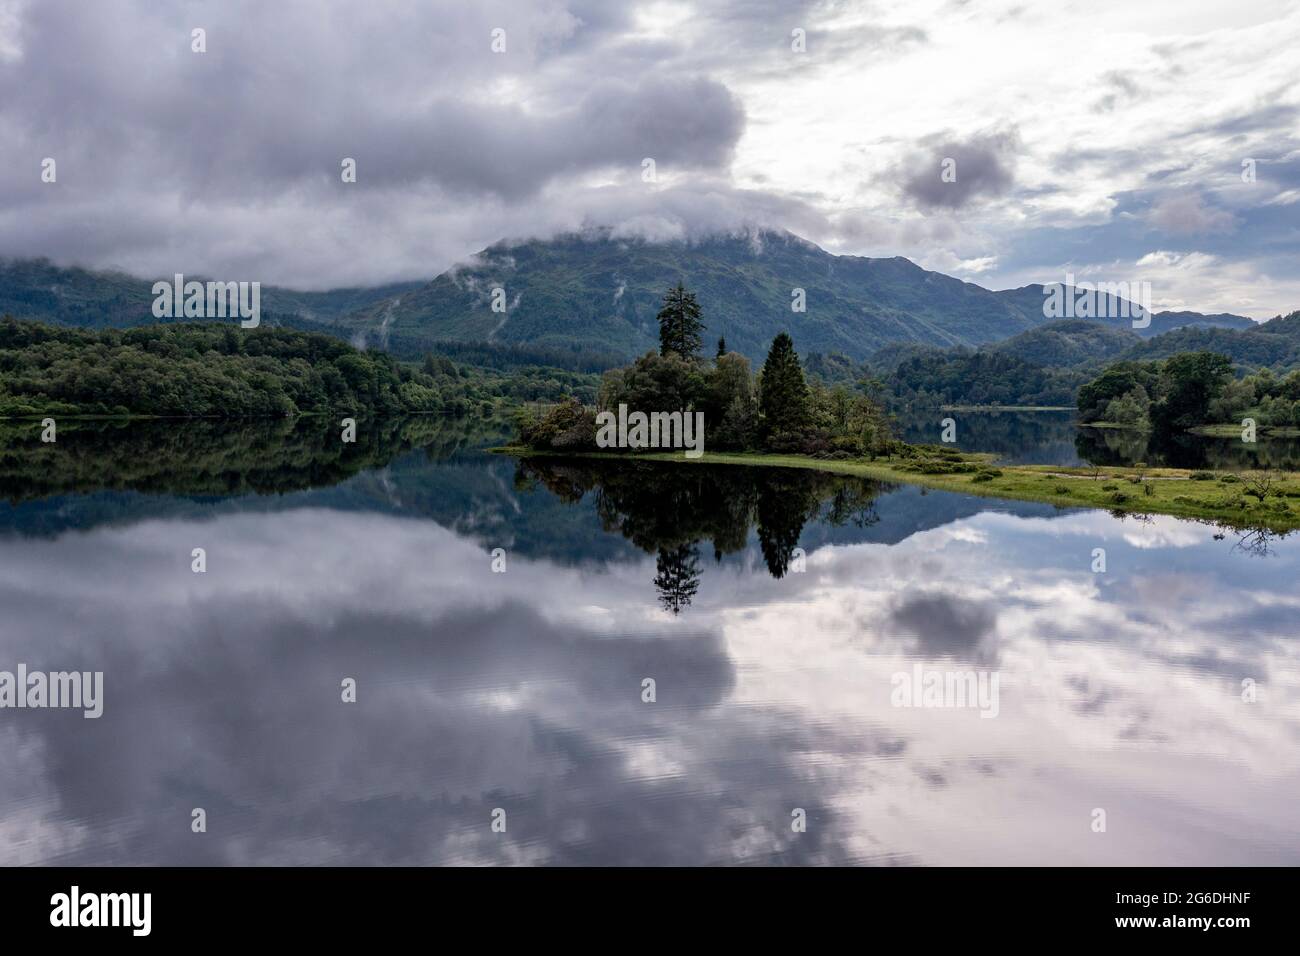 Loch Achray, Loch Lomond and Trossachs National Park, Scotland, UK. 4 July 2021. Pictured: Loch Achray turns into a mirror reflection the areas outstanding natural beauty with the Loch Achray hotel in the background at the foot of the mountains.  Credit: Colin Fisher/Alamy Live News Stock Photo